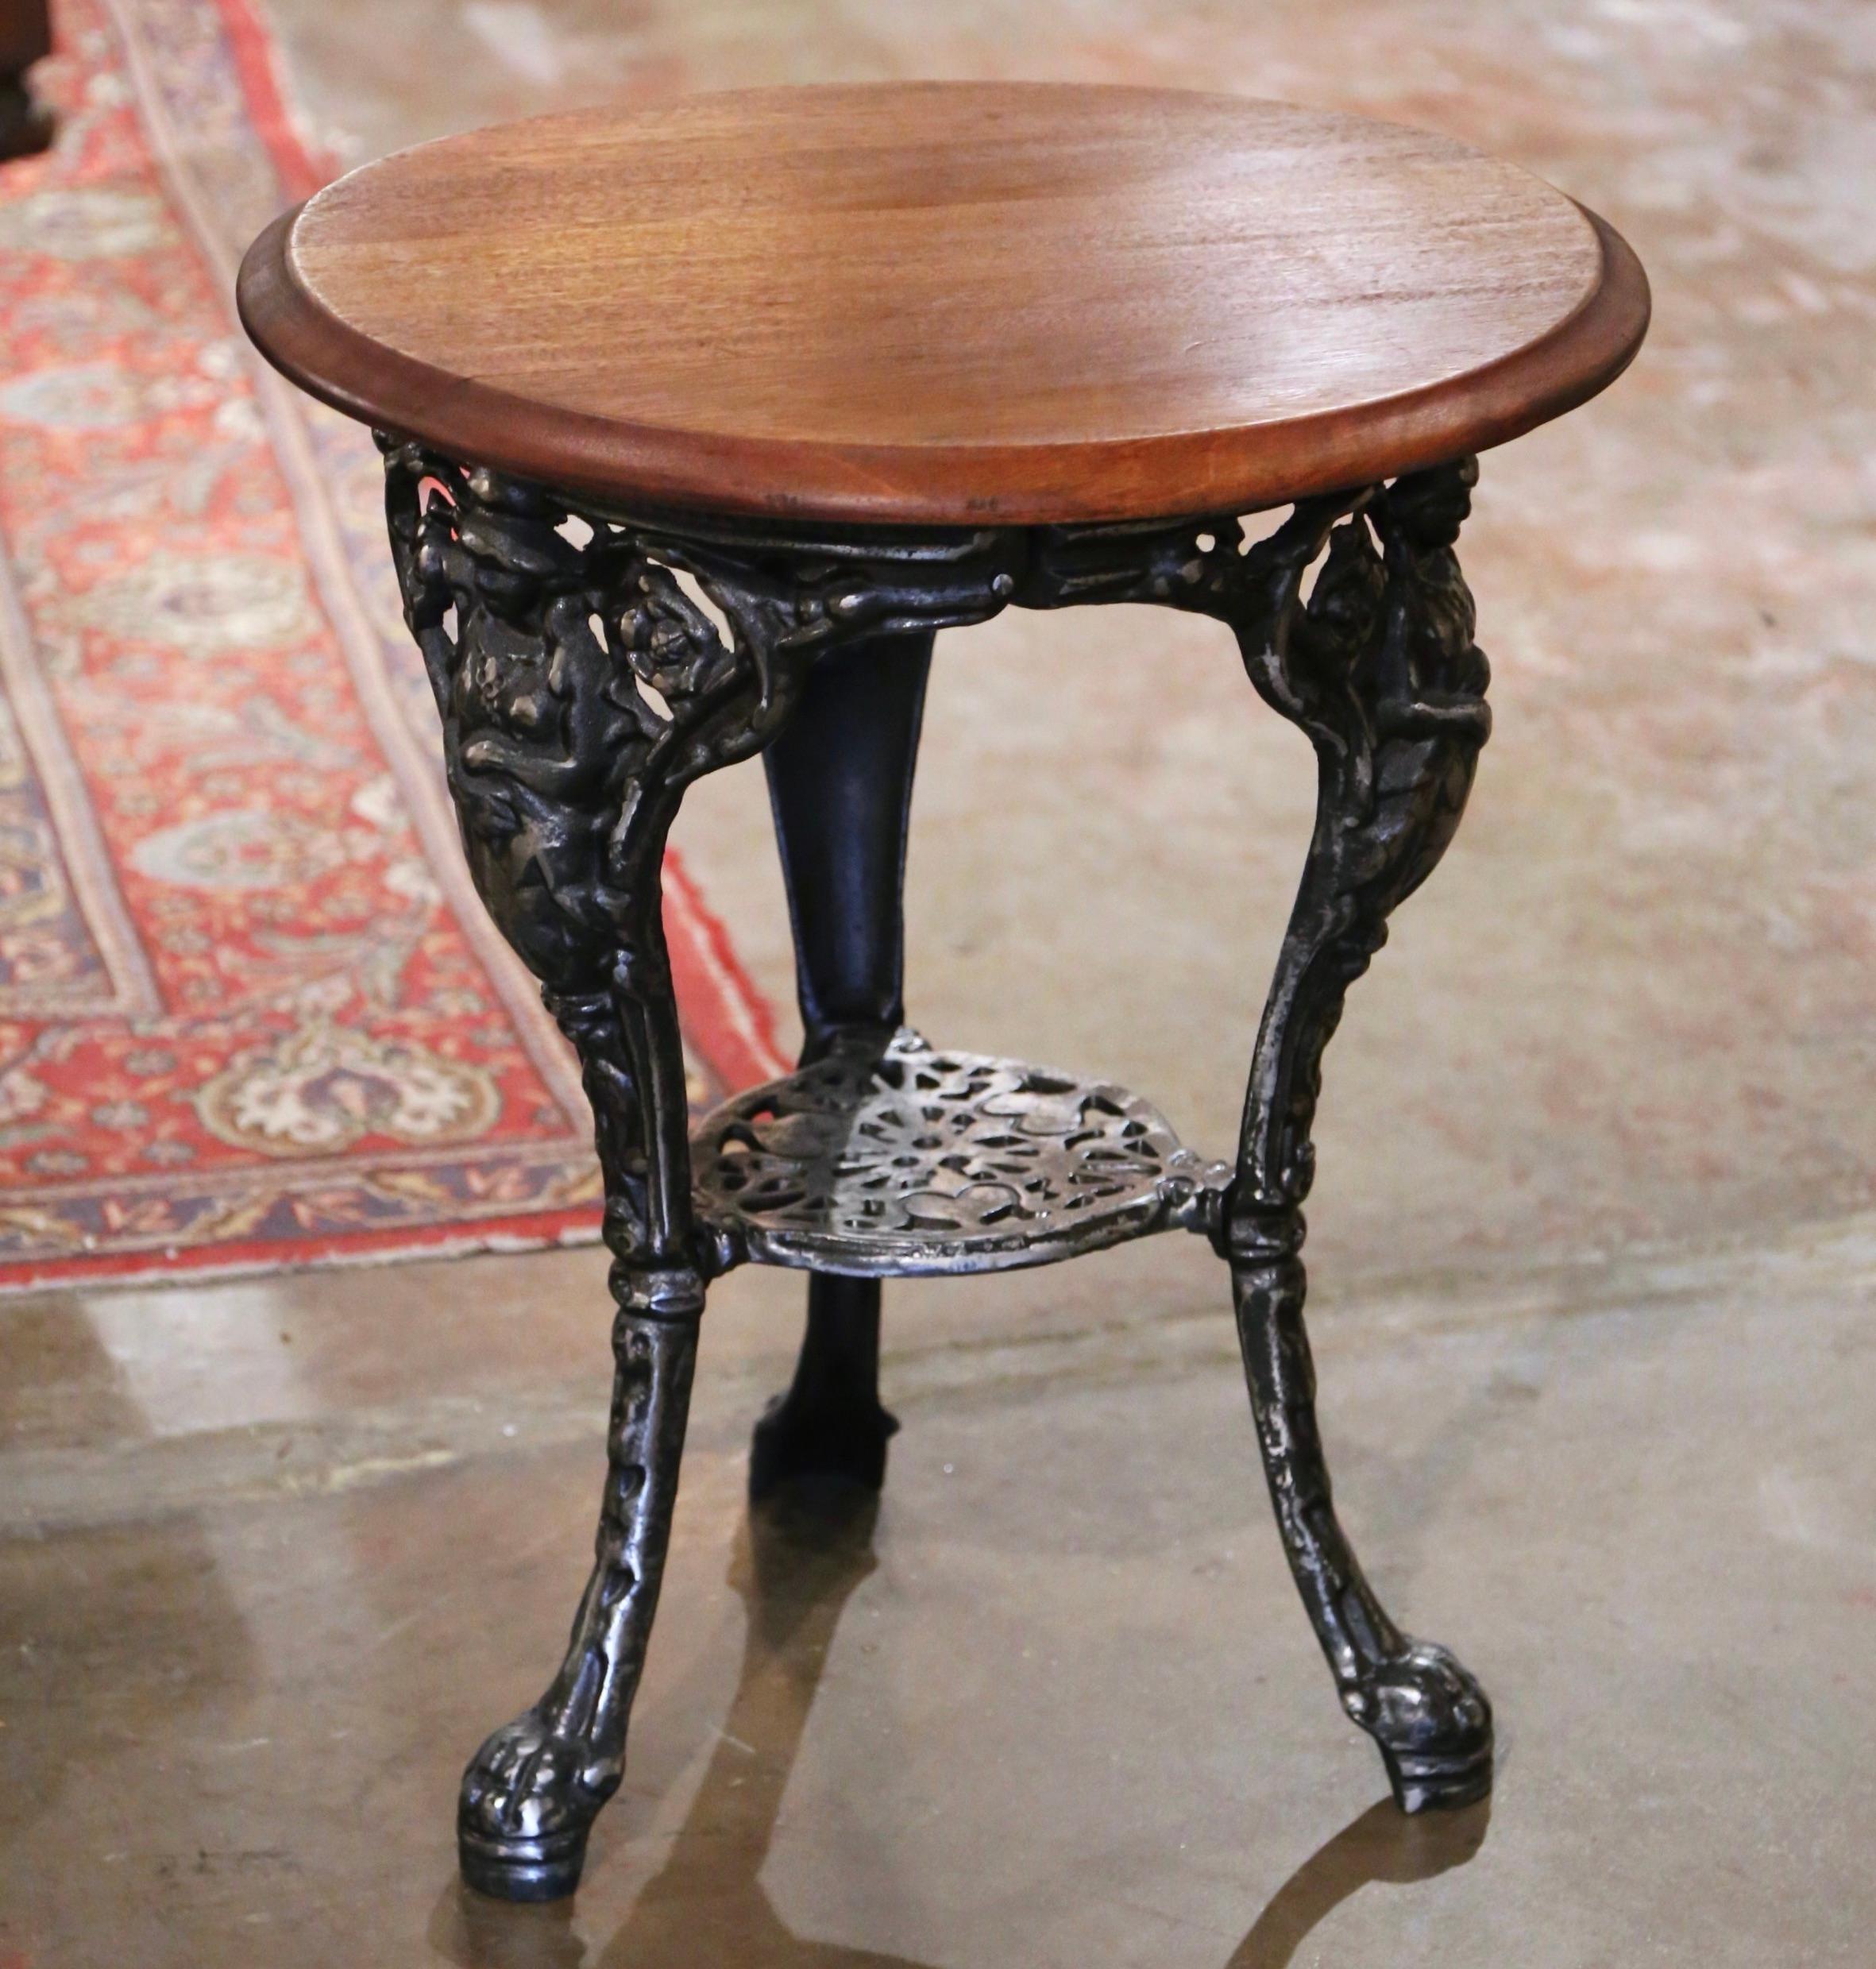 Decorate a covered patio, or sun room with this elegant antique iron and walnut gueridon table. Crafted in England circa 1880, the pub table stands on three cabriole legs ending with paw feet decorated with female figures at the shoulder; the legs